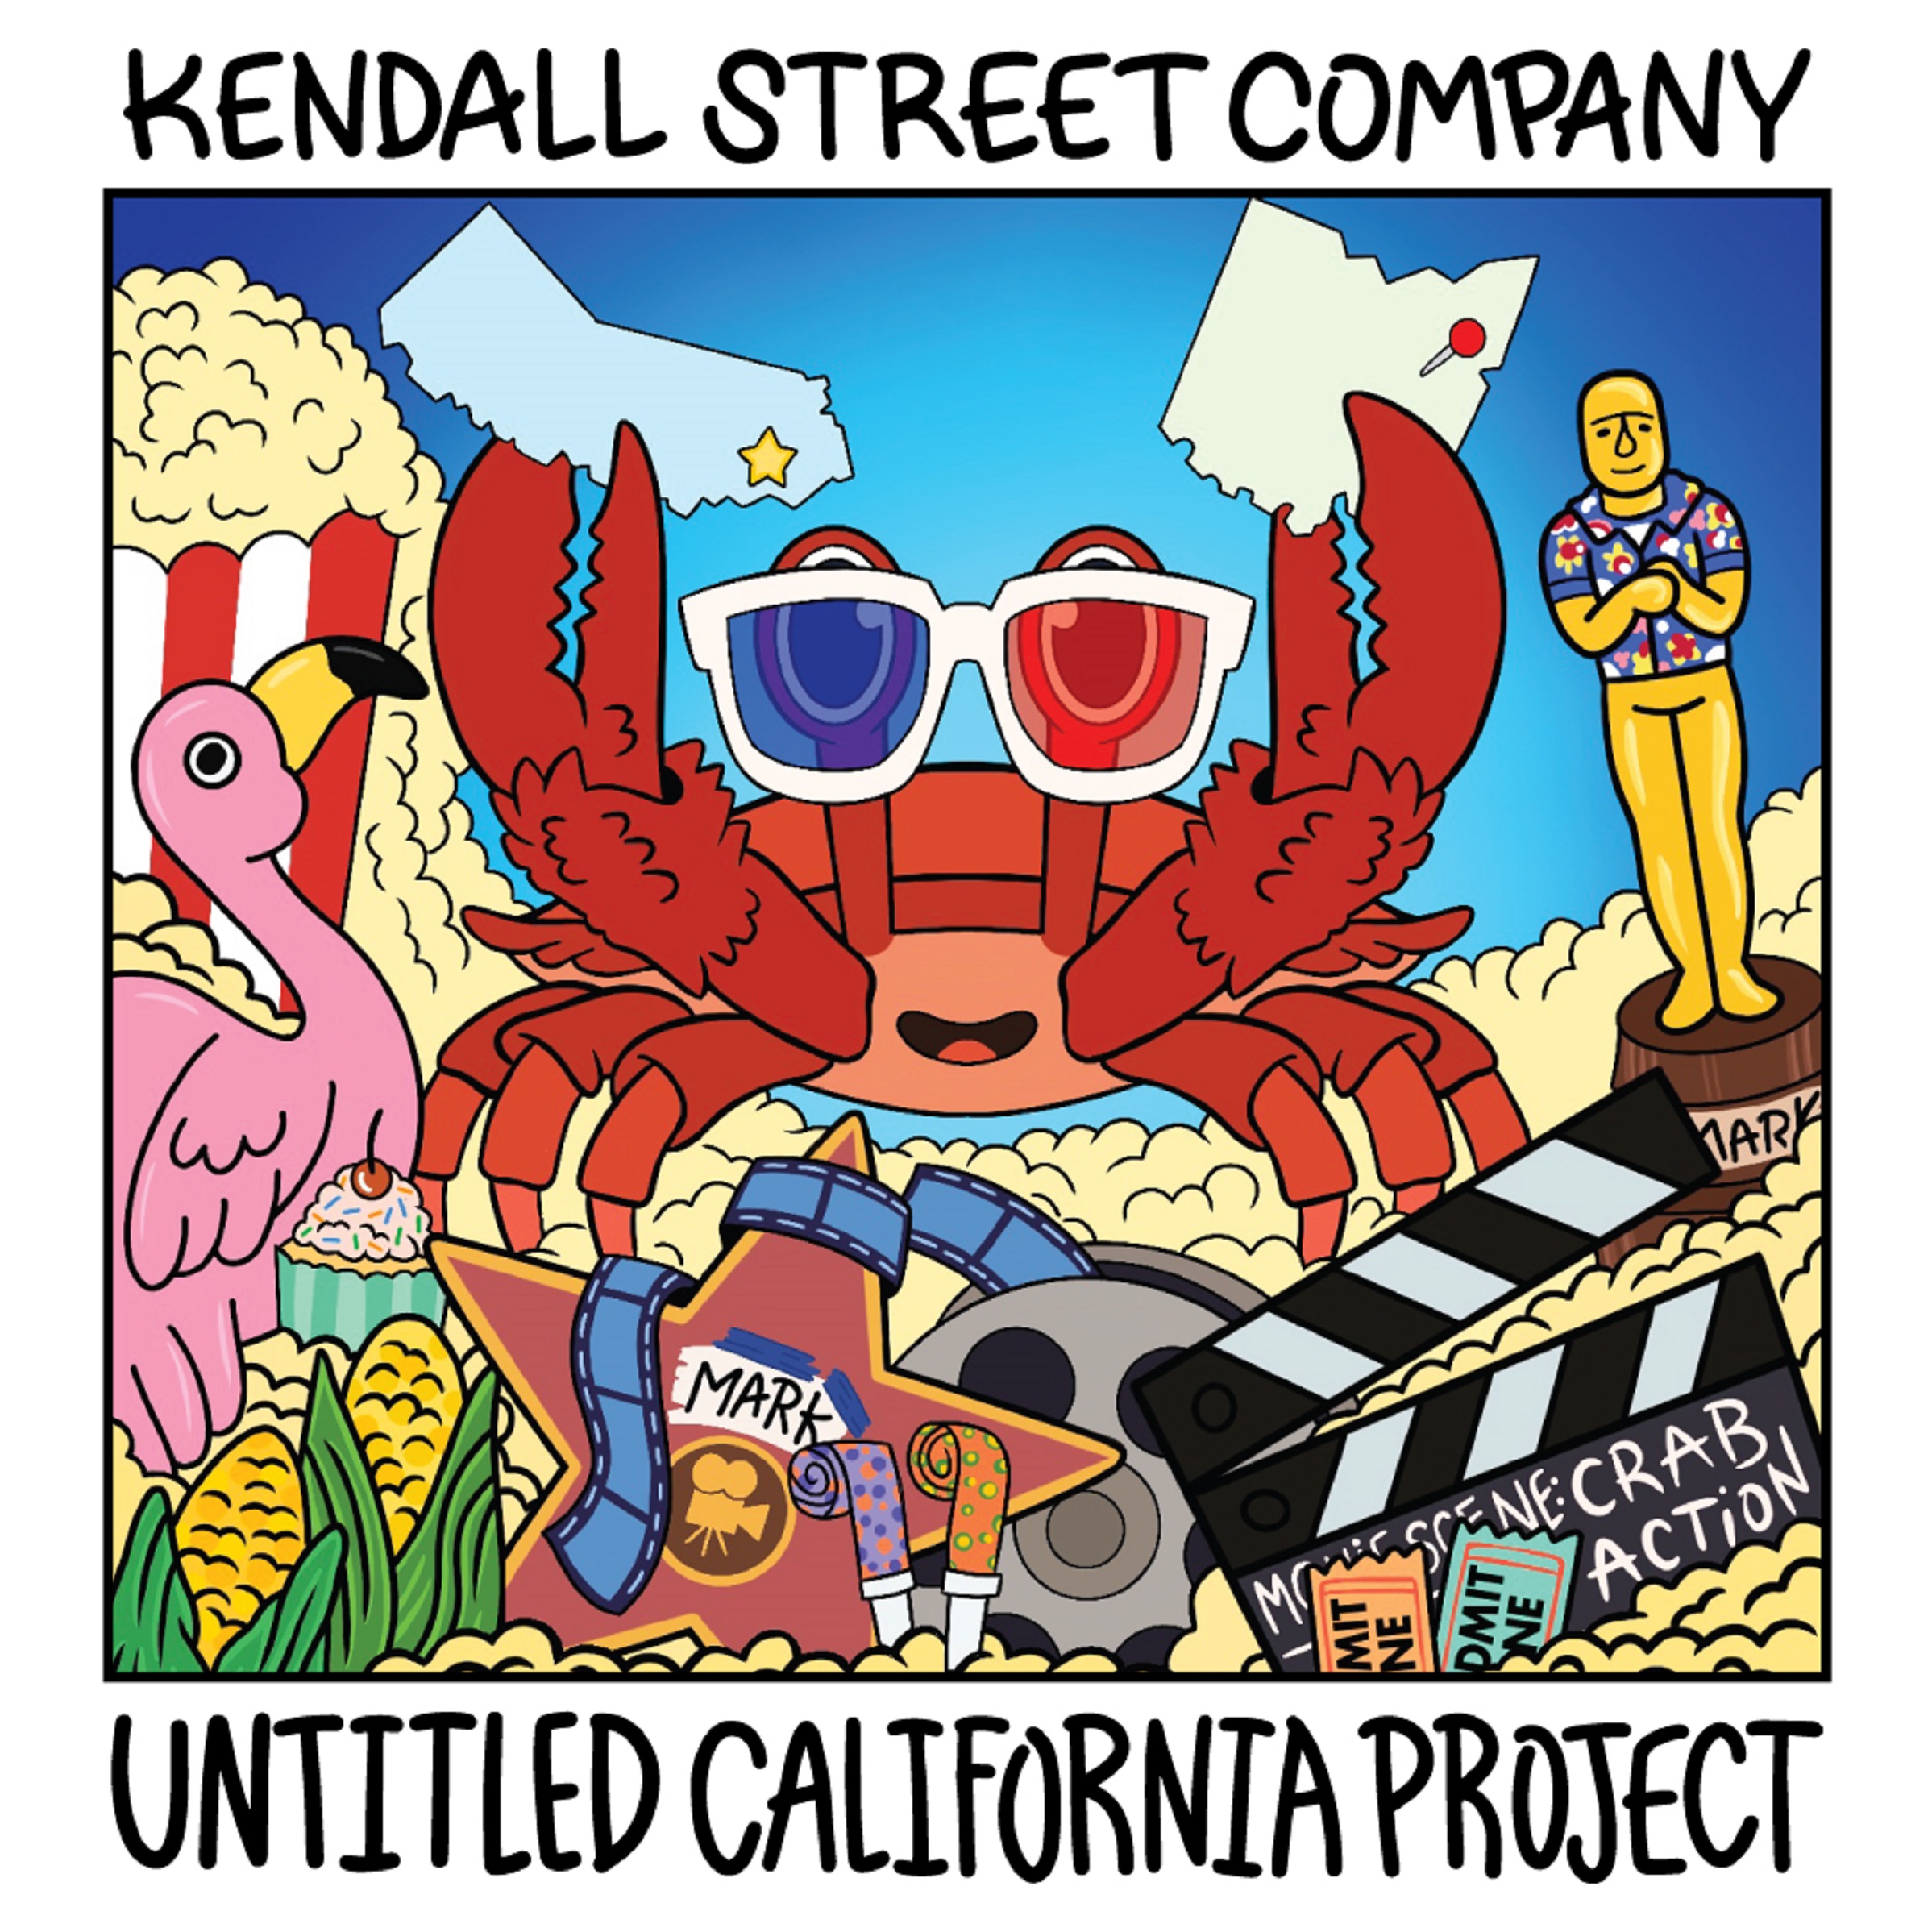 KENDALL STREET COMPANY ANNOUNCES UNTITLED CALIFORNIA PROJECT - NEW EP + MUSIC VIDEO + TOUR DATES